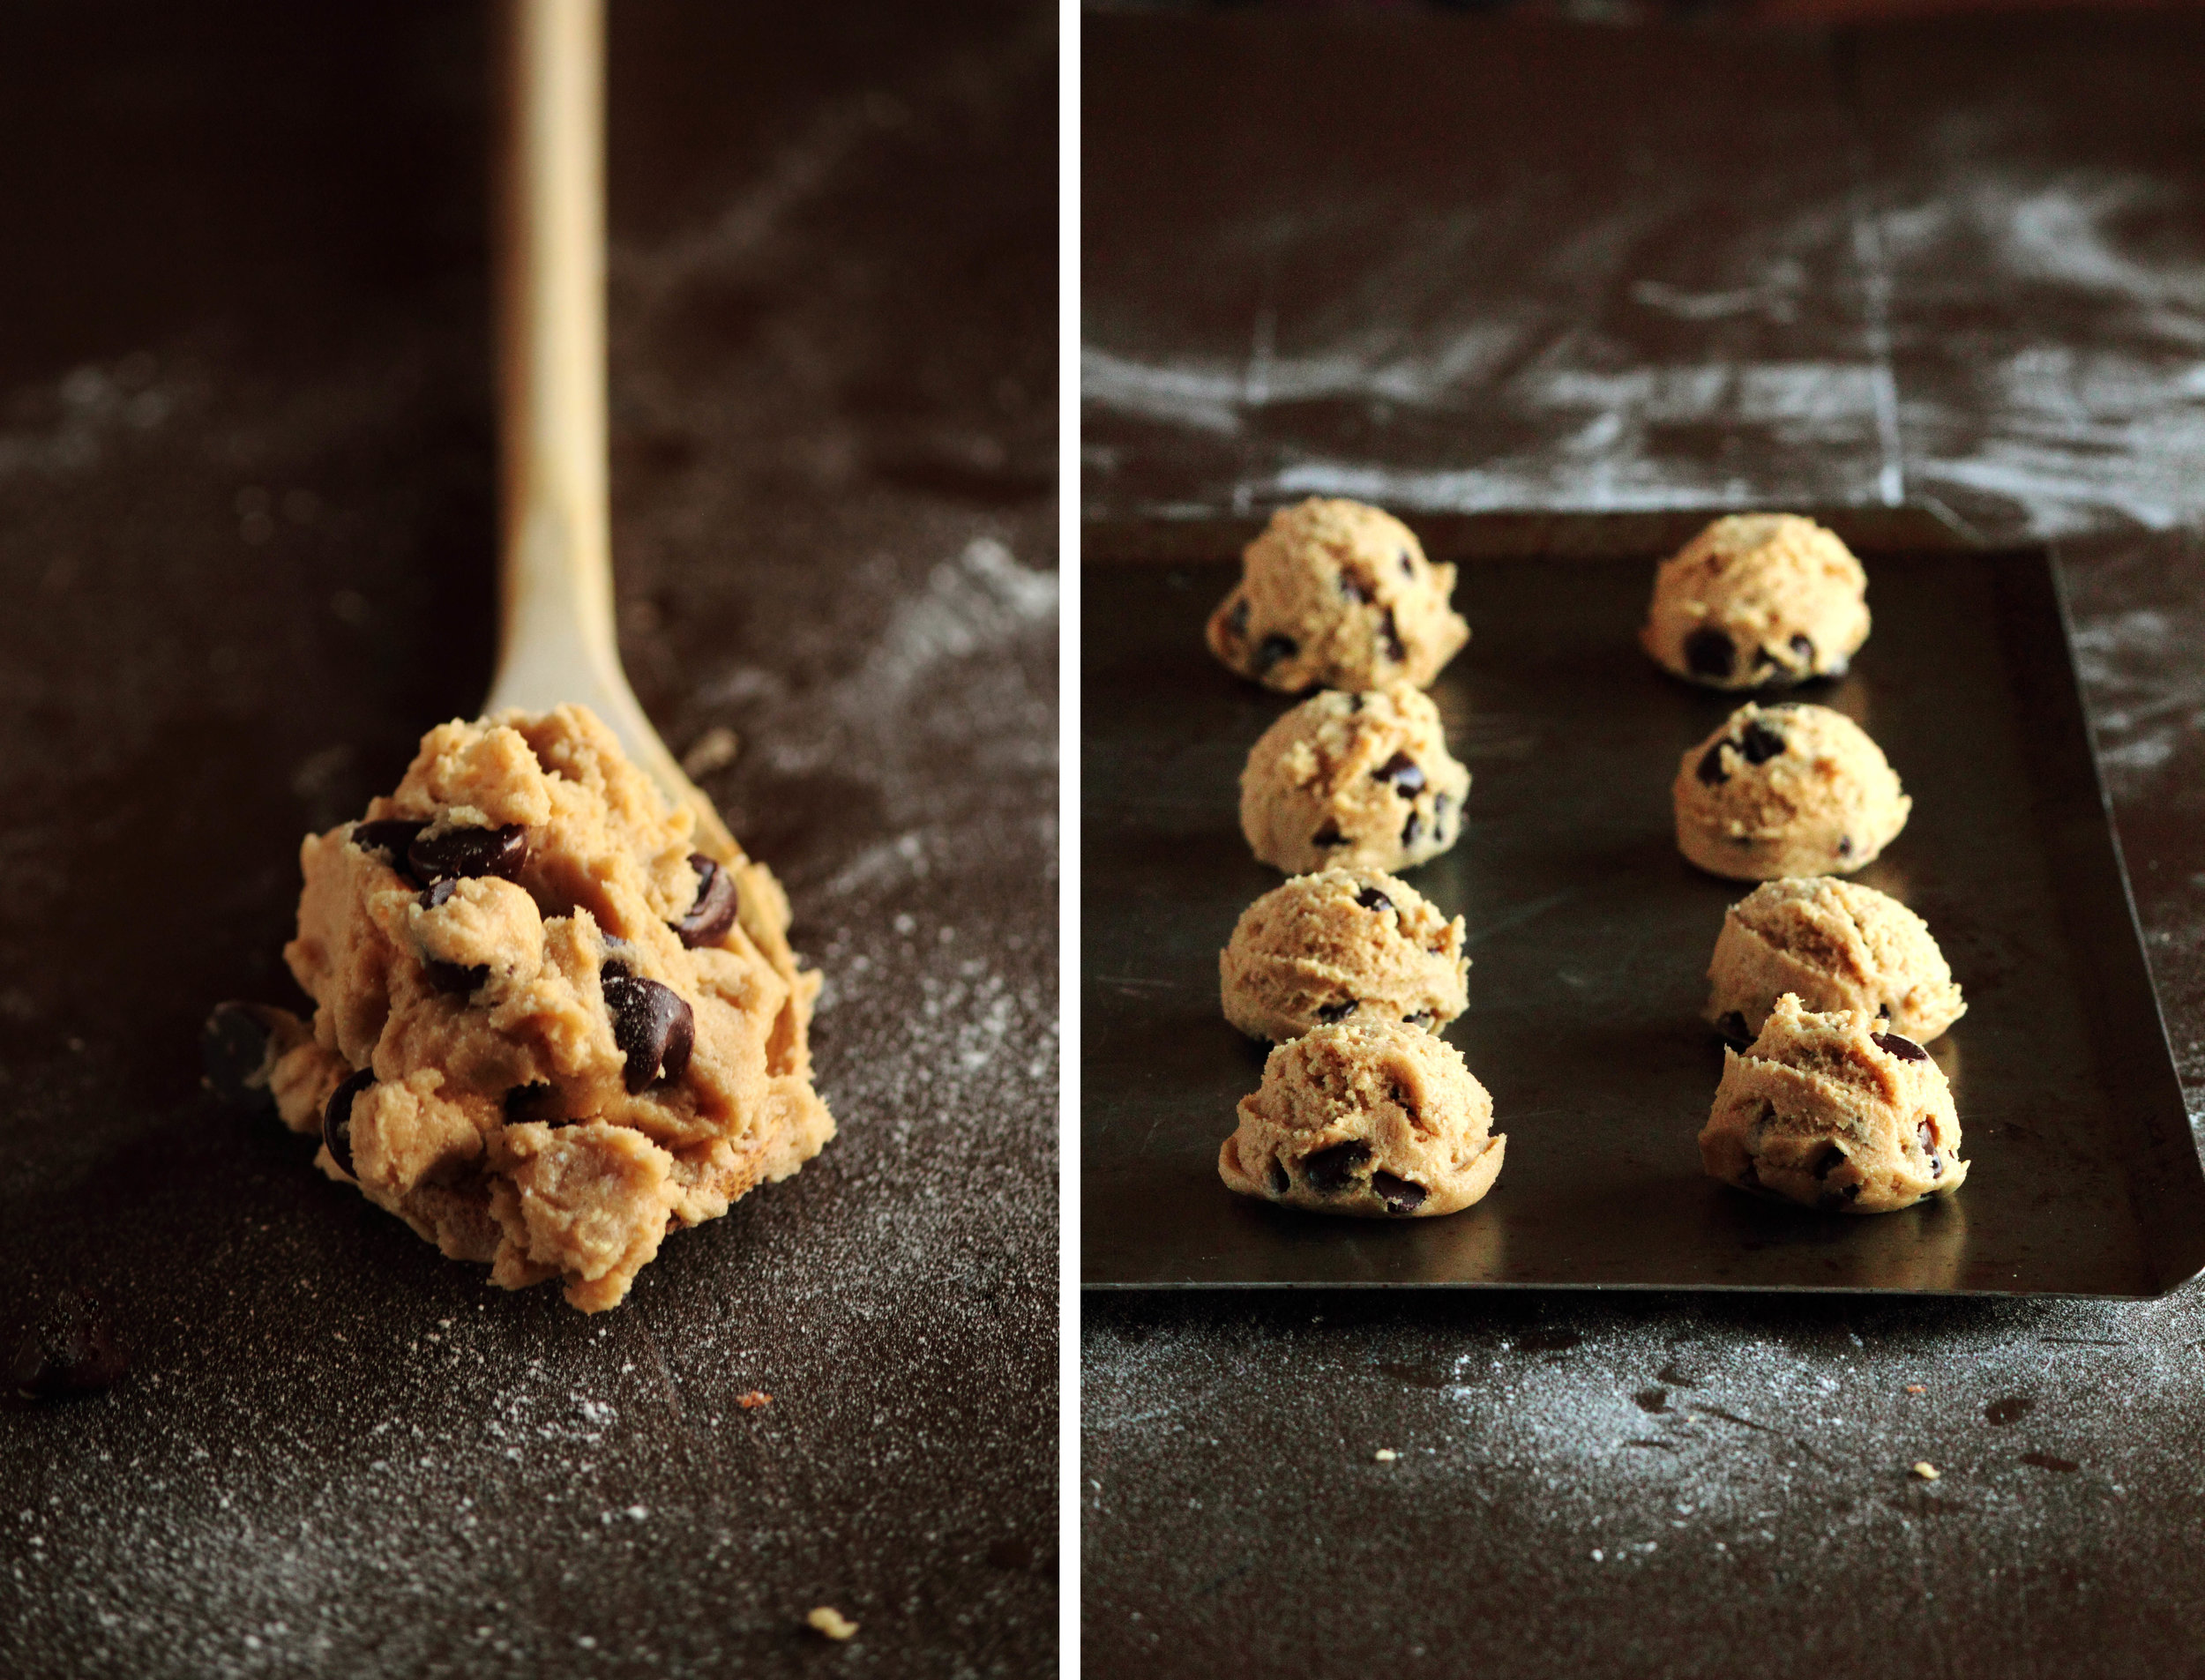 How to Freeze Cookie Dough (& Bake From Frozen)